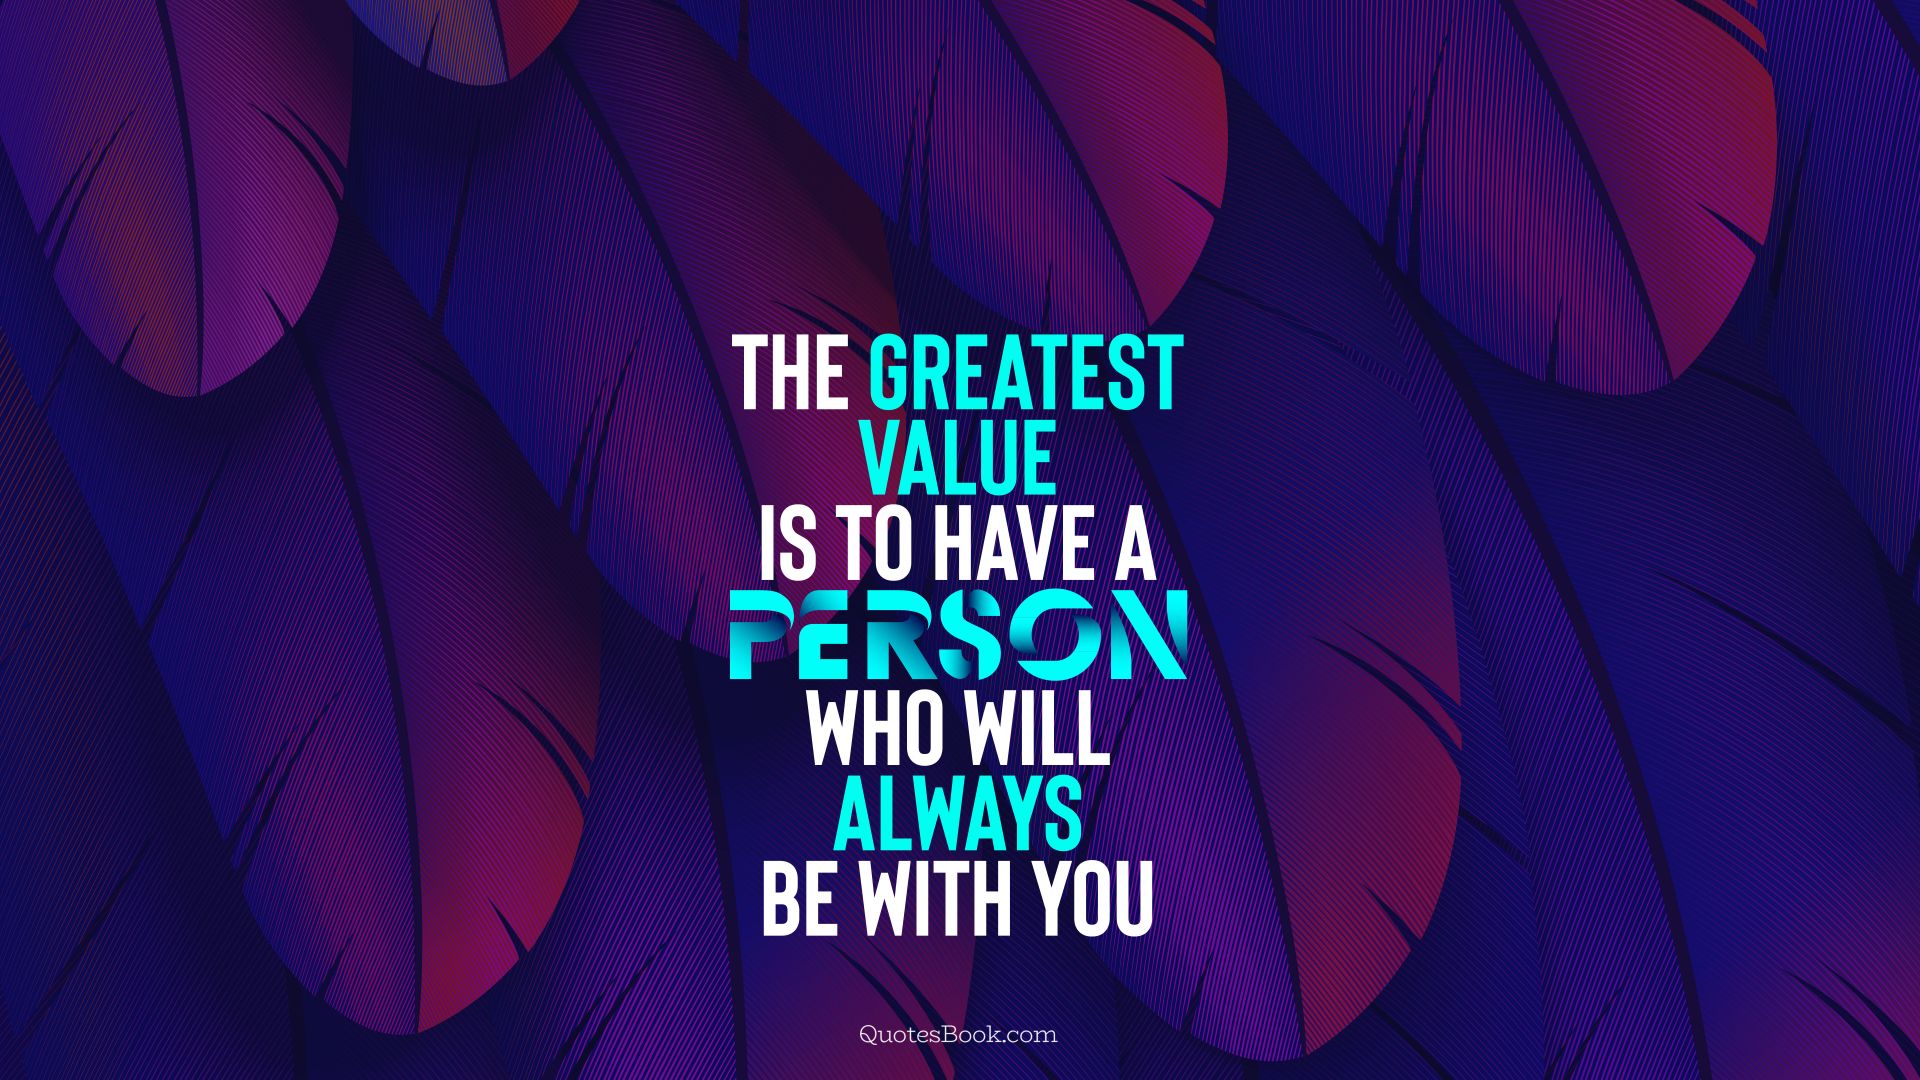 The greatest value is to have a person who will always be with you